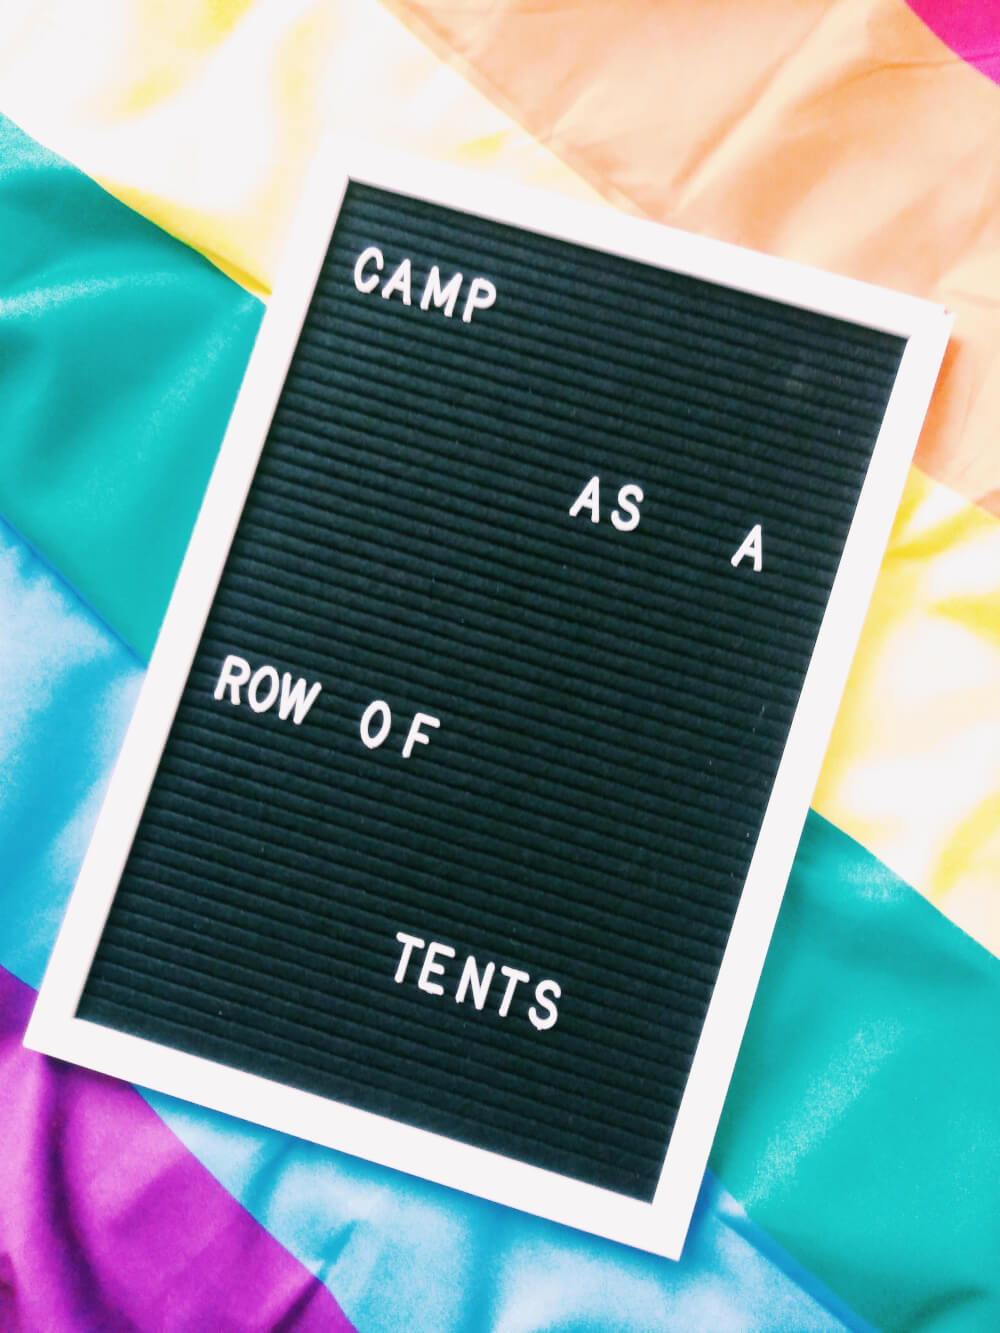 Letter board that says "Camp as a row of tents" atop a gay Pride flag